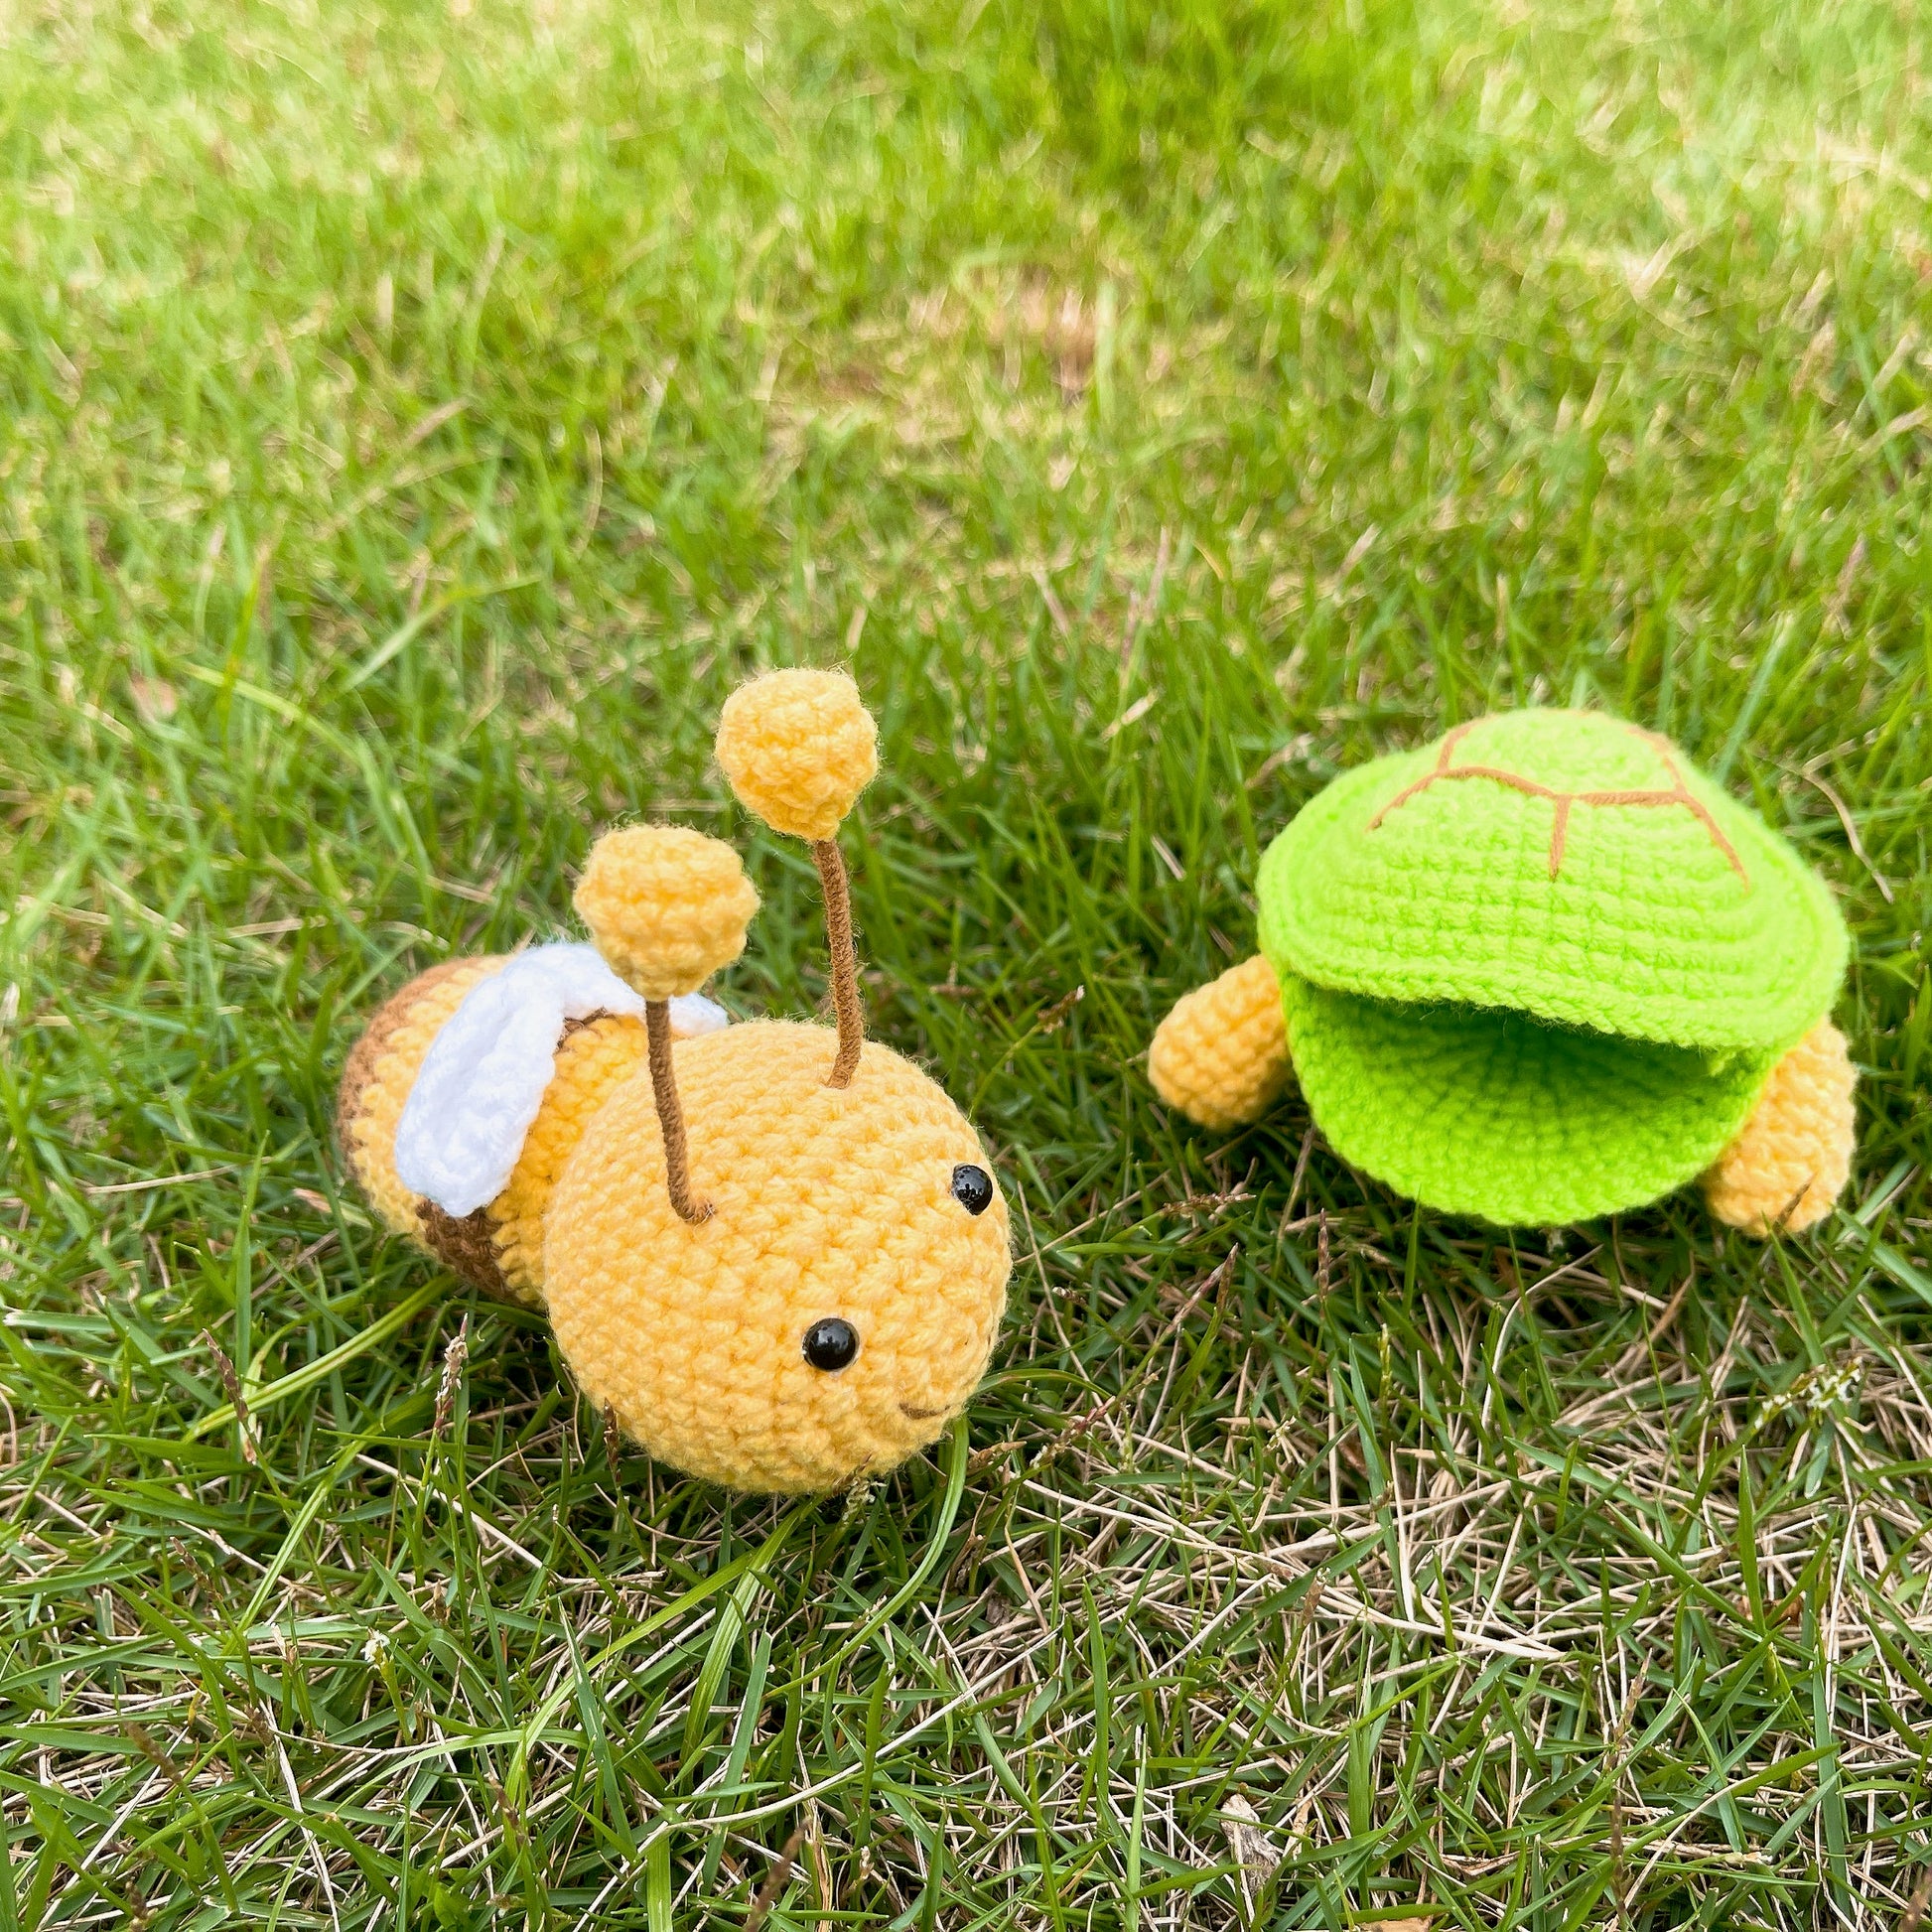 Buzzy the Turtle - Crochet Amigurumi Bee in Shell Plushie, Whimsical Gift, Collectible, Creative Toy, Handmade Toys, Inspirational Gifts